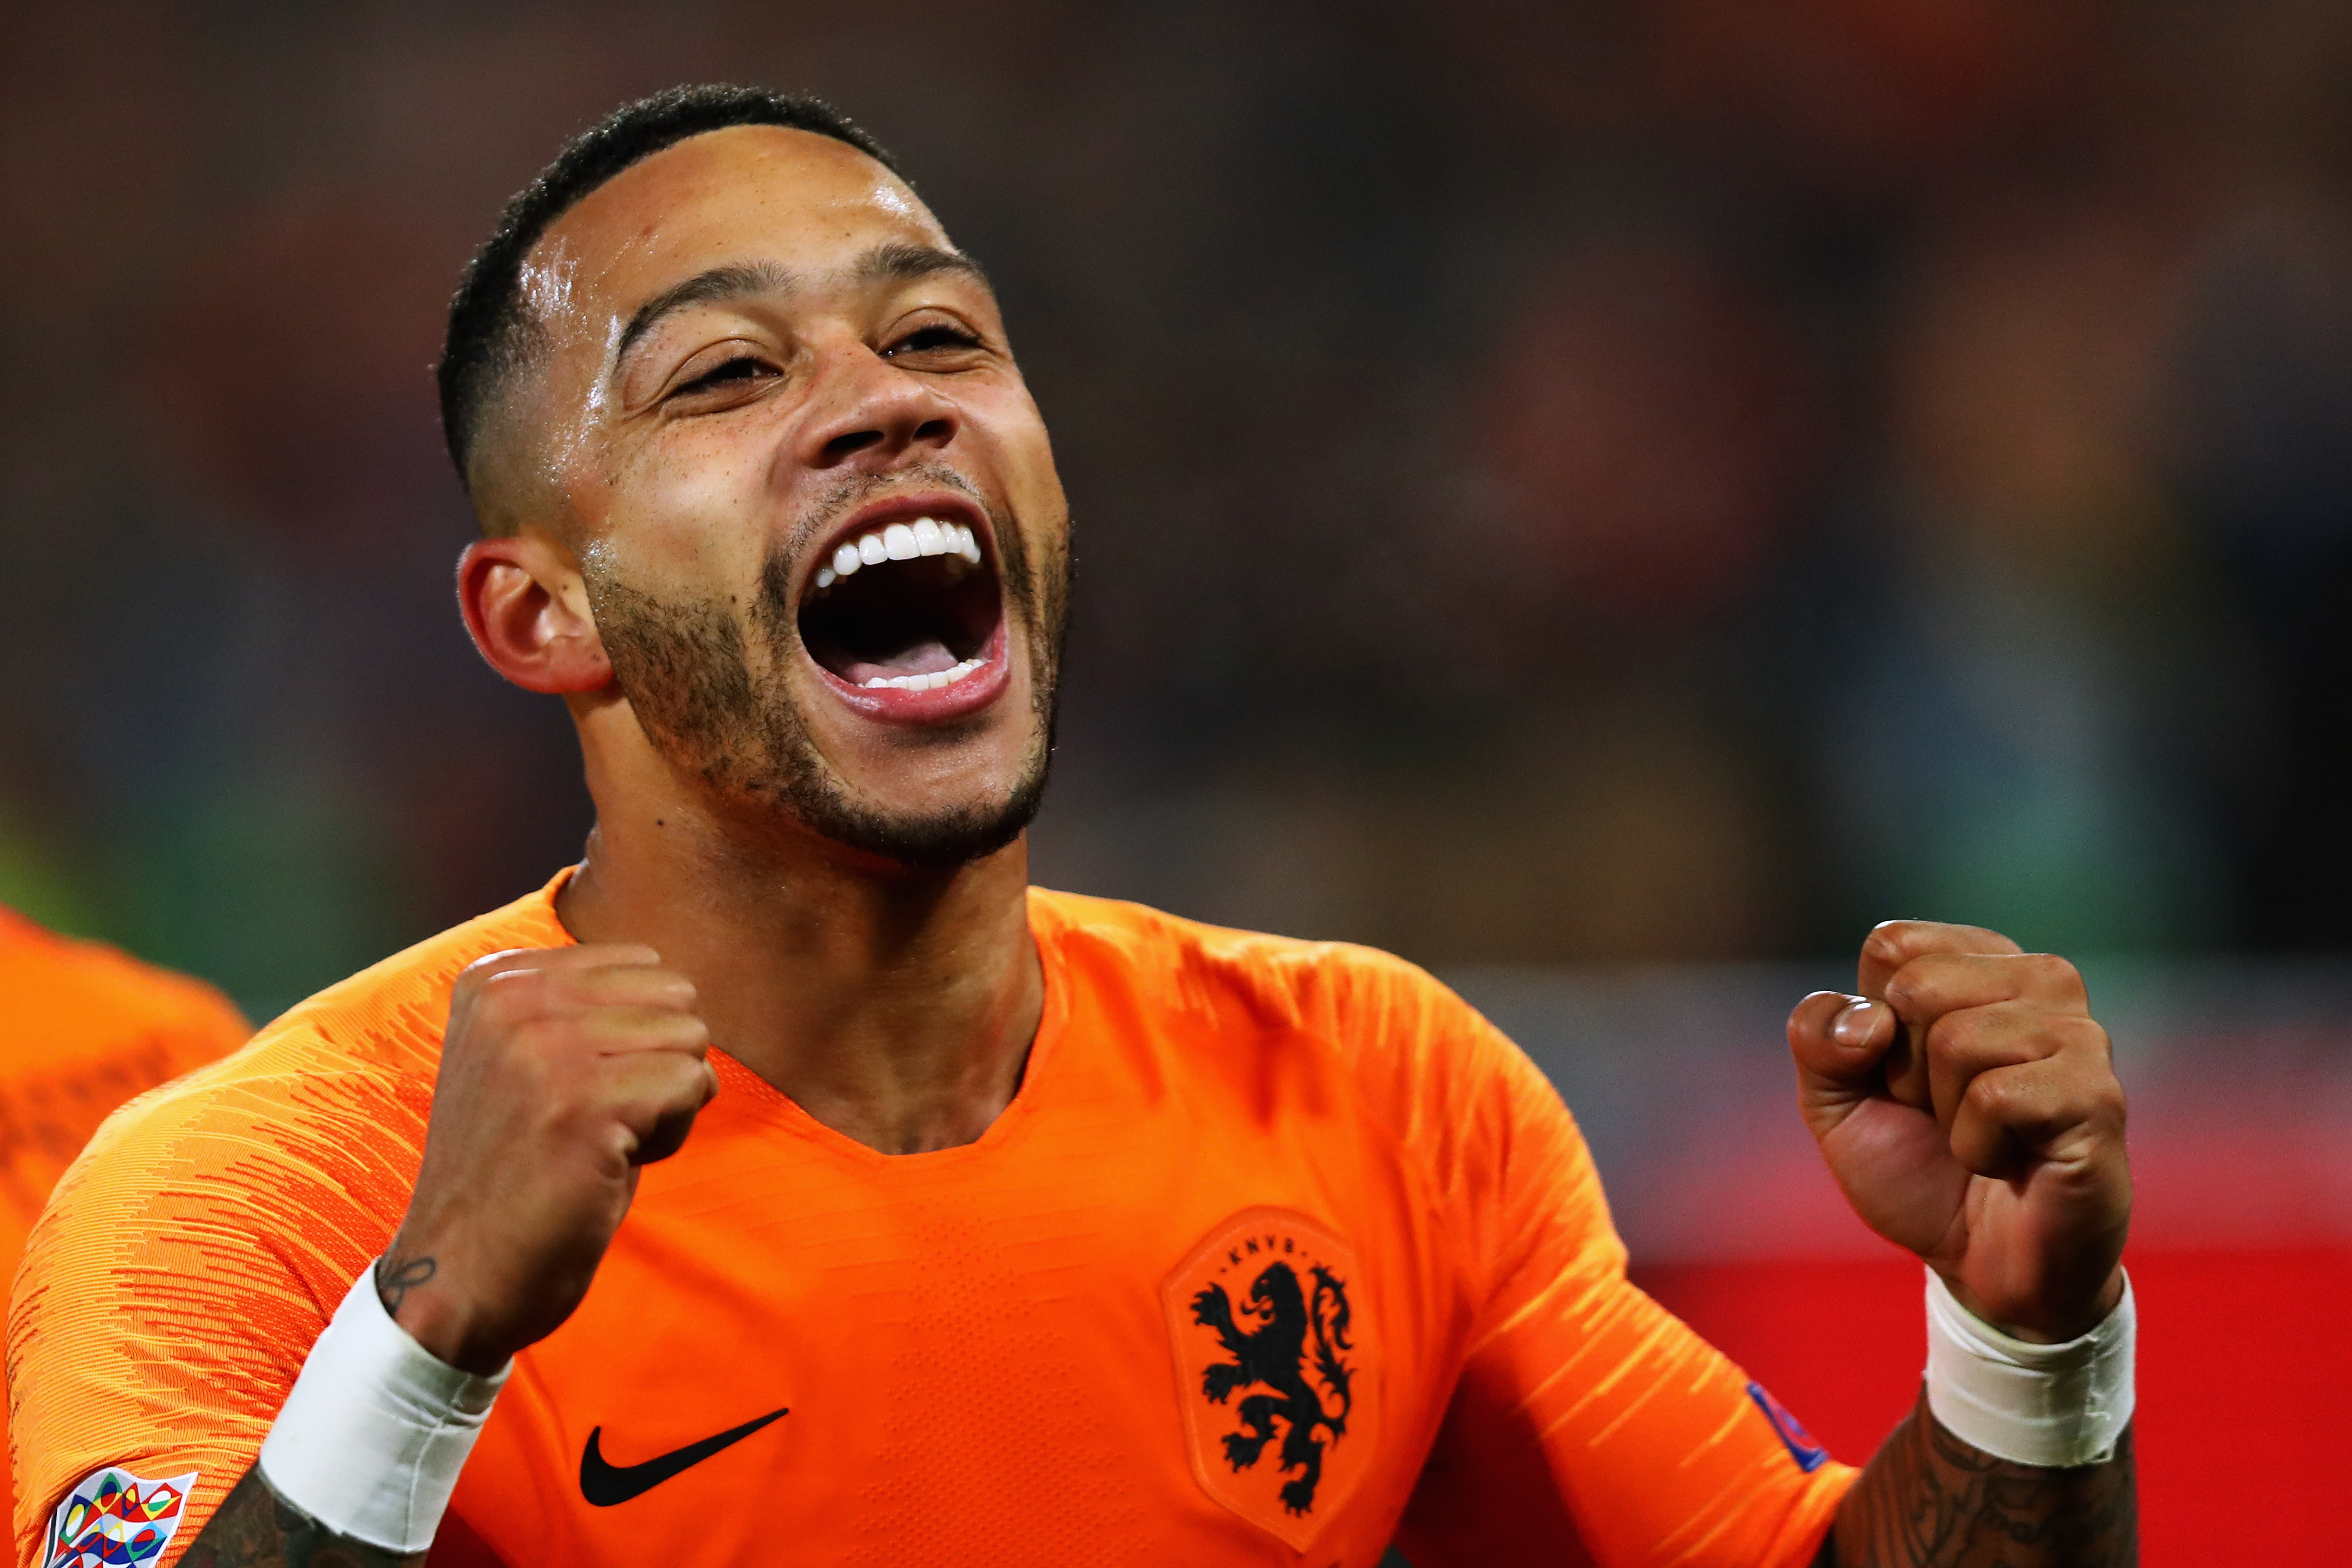 ROTTERDAM, NETHERLANDS - NOVEMBER 16:  Memphis Depay of the Netherlands celebrates scoring his teams second goal of the game during the UEFA Nations League A group one match between Netherlands and France at De Kuip on November 16, 2018 in Amsterdam, Netherlands.  (Photo by Dean Mouhtaropoulos/Getty Images)